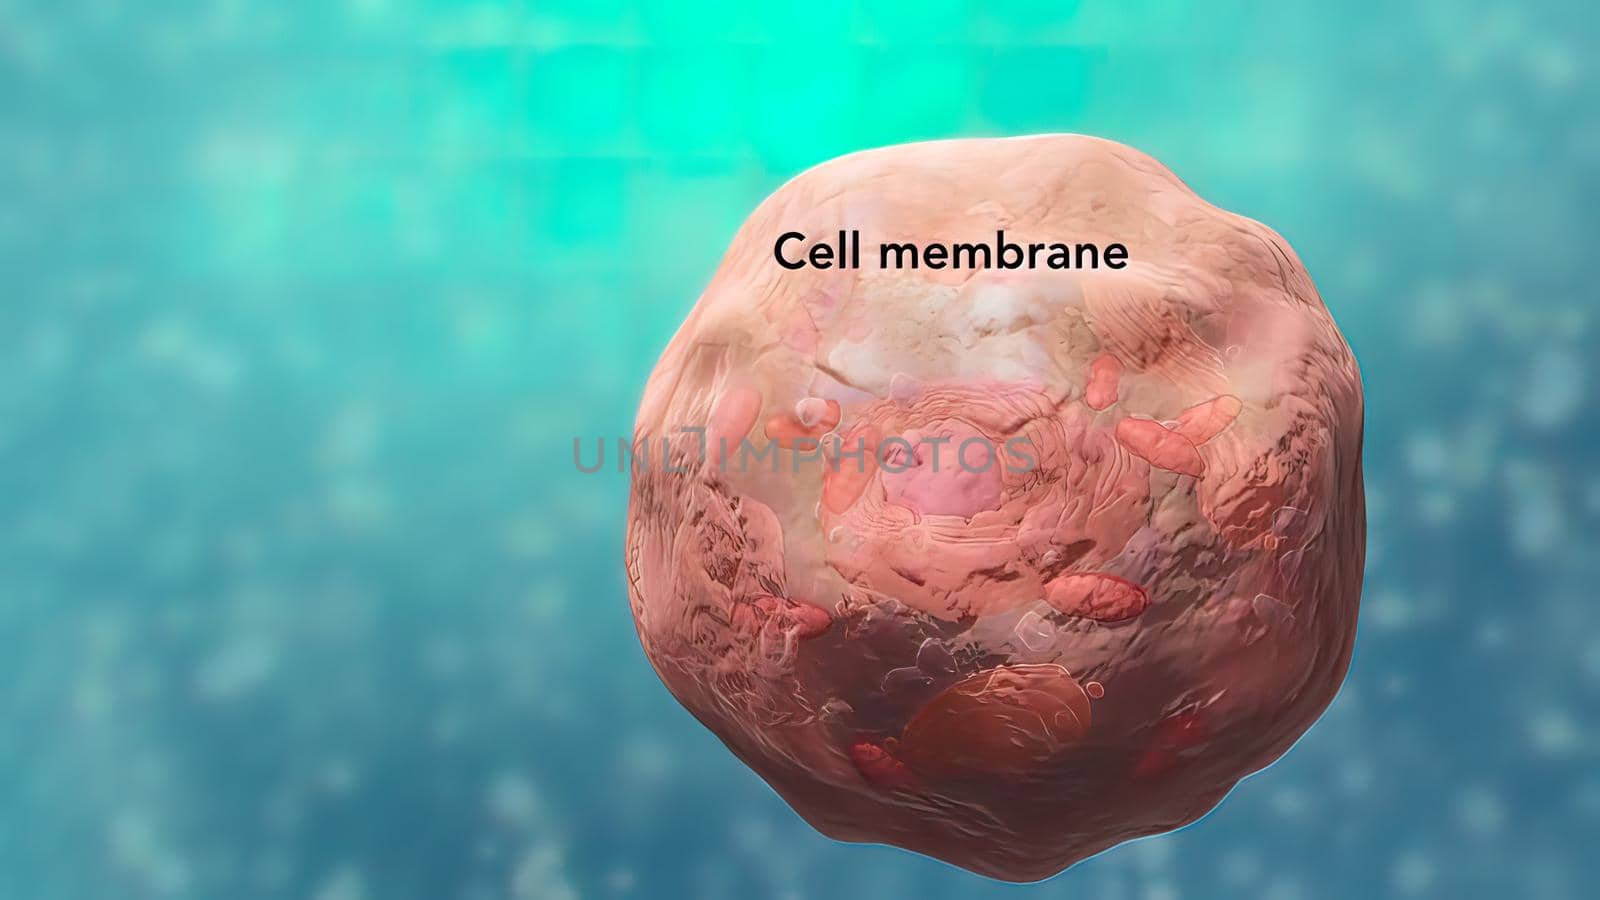 All chromosomal DNA is stored in the cell nucleus, separated from the cytoplasm by a membrane. Some eukaryotic organelles such as mitochondria also contain some DNA. 3D illustration